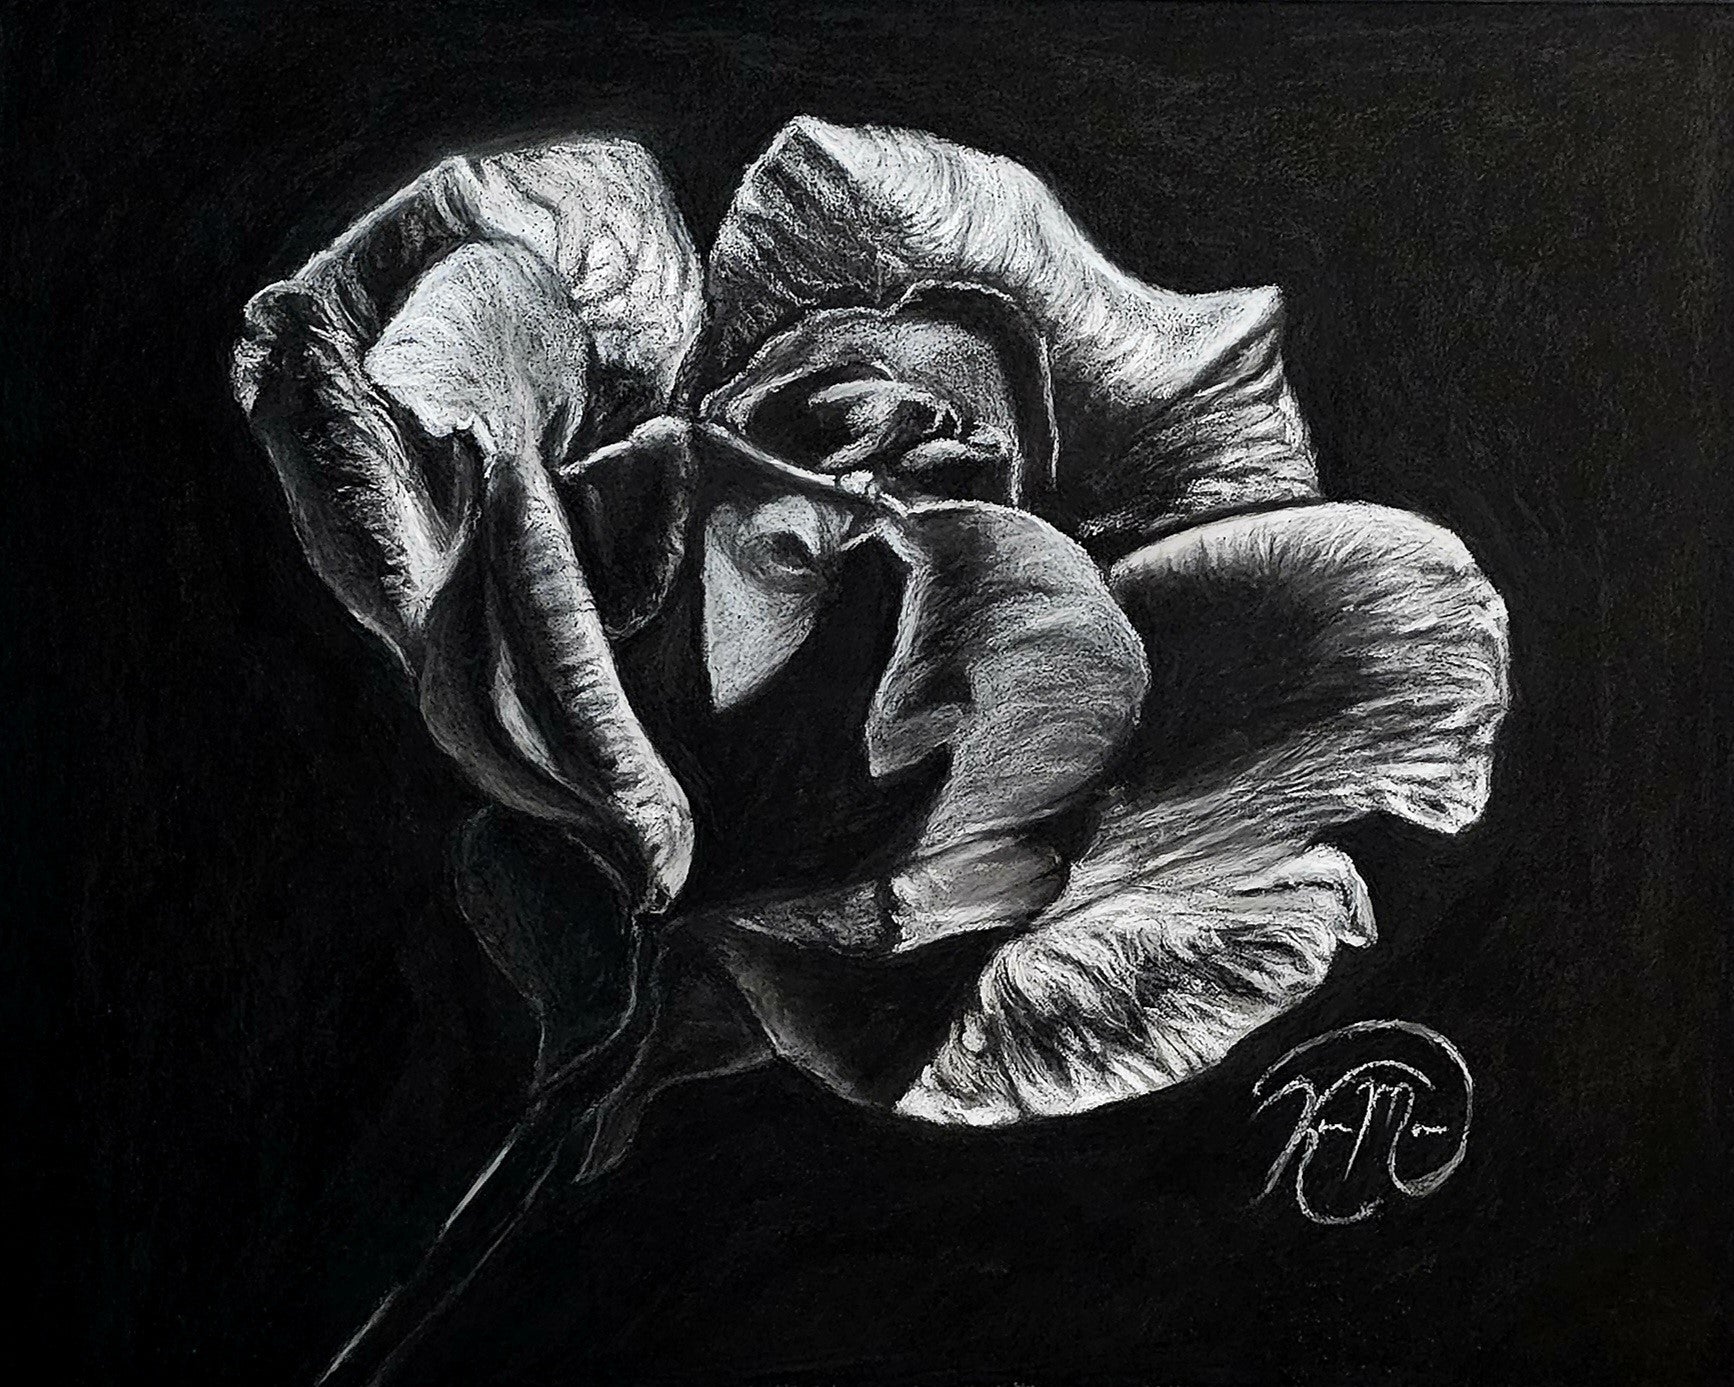 Black and white wilting rose emerging from the darkness